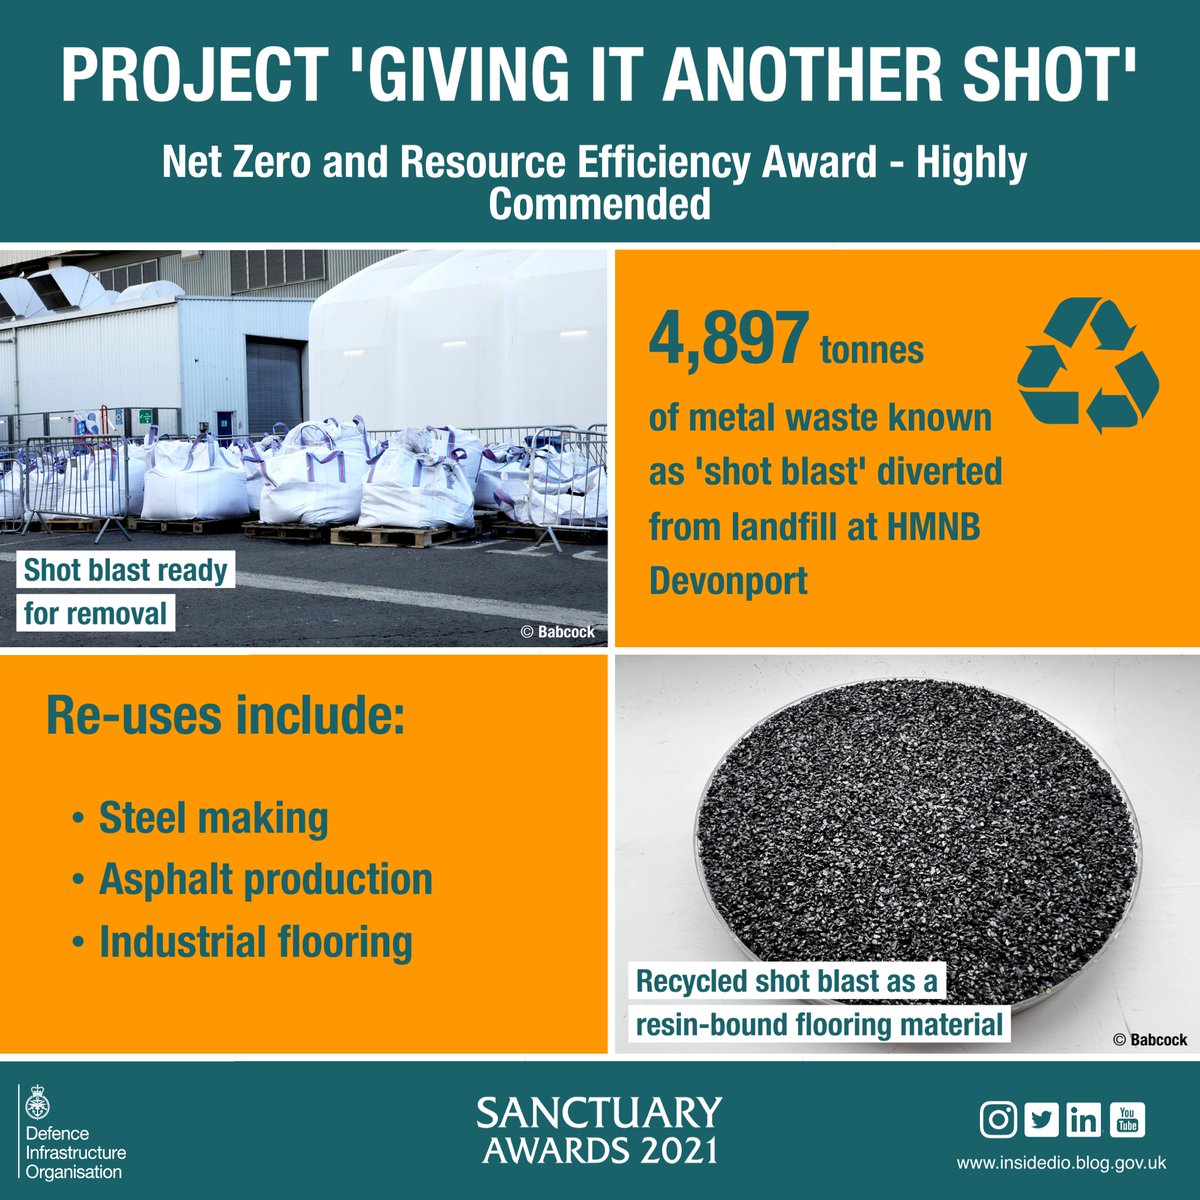 Highly commended in the 2021 #SanctuaryAwards Net Zero and Resource Efficiency category, the ‘Giving it Another Shot’ project at HMNB Devonport saw the Babcock team take an inventive approach to reducing waste sent to landfill. #NetZeroWeek 1/2